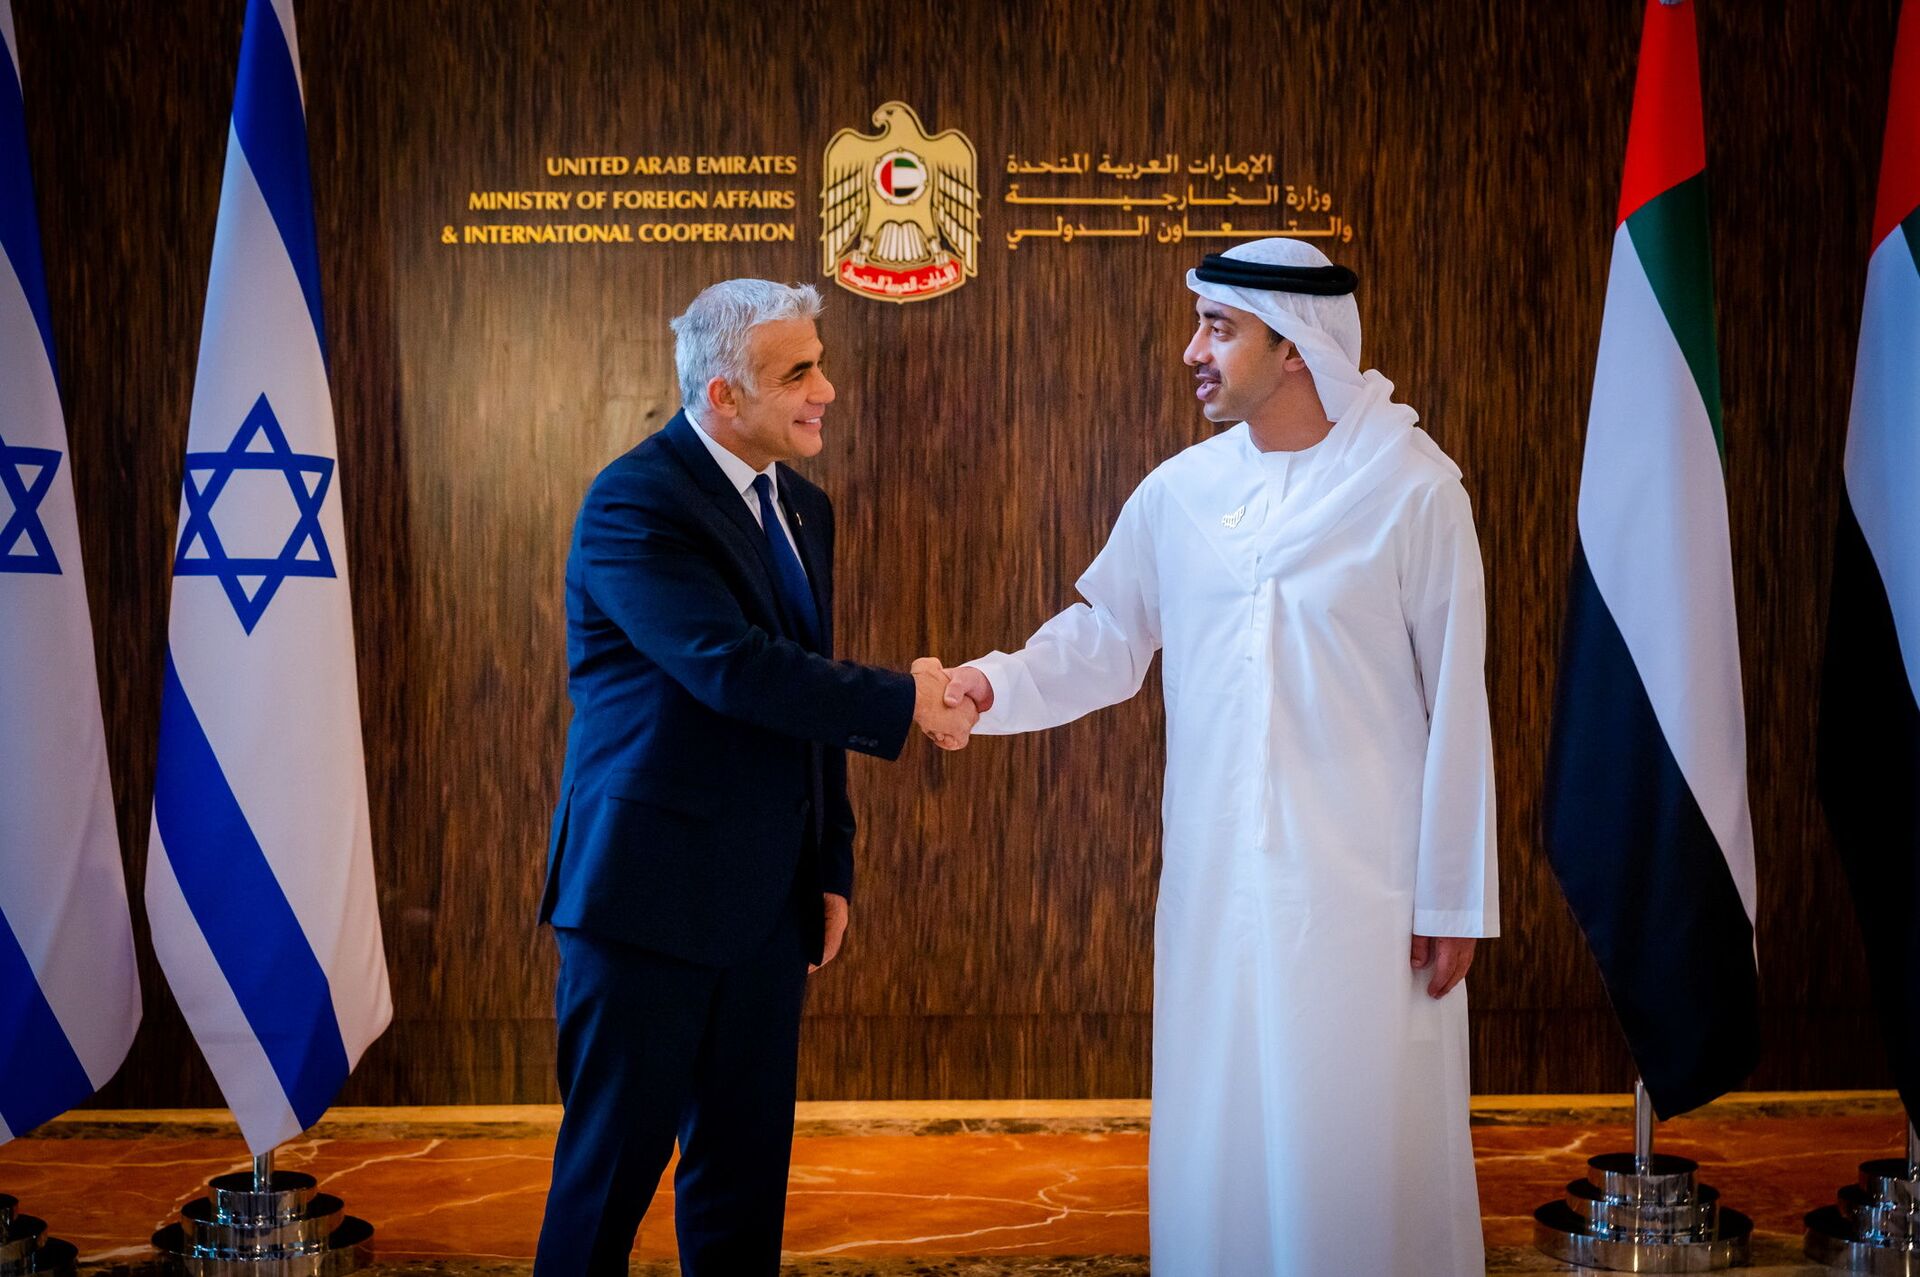 Israel's Foreign Minister Yair Lapid shakes hands with United Arab Emirates' Foreign Minister Sheikh Abdullah bin Zayed al-Nahyan in Abu Dhabi, UAE June 29, 2021. - Sputnik International, 1920, 22.12.2021